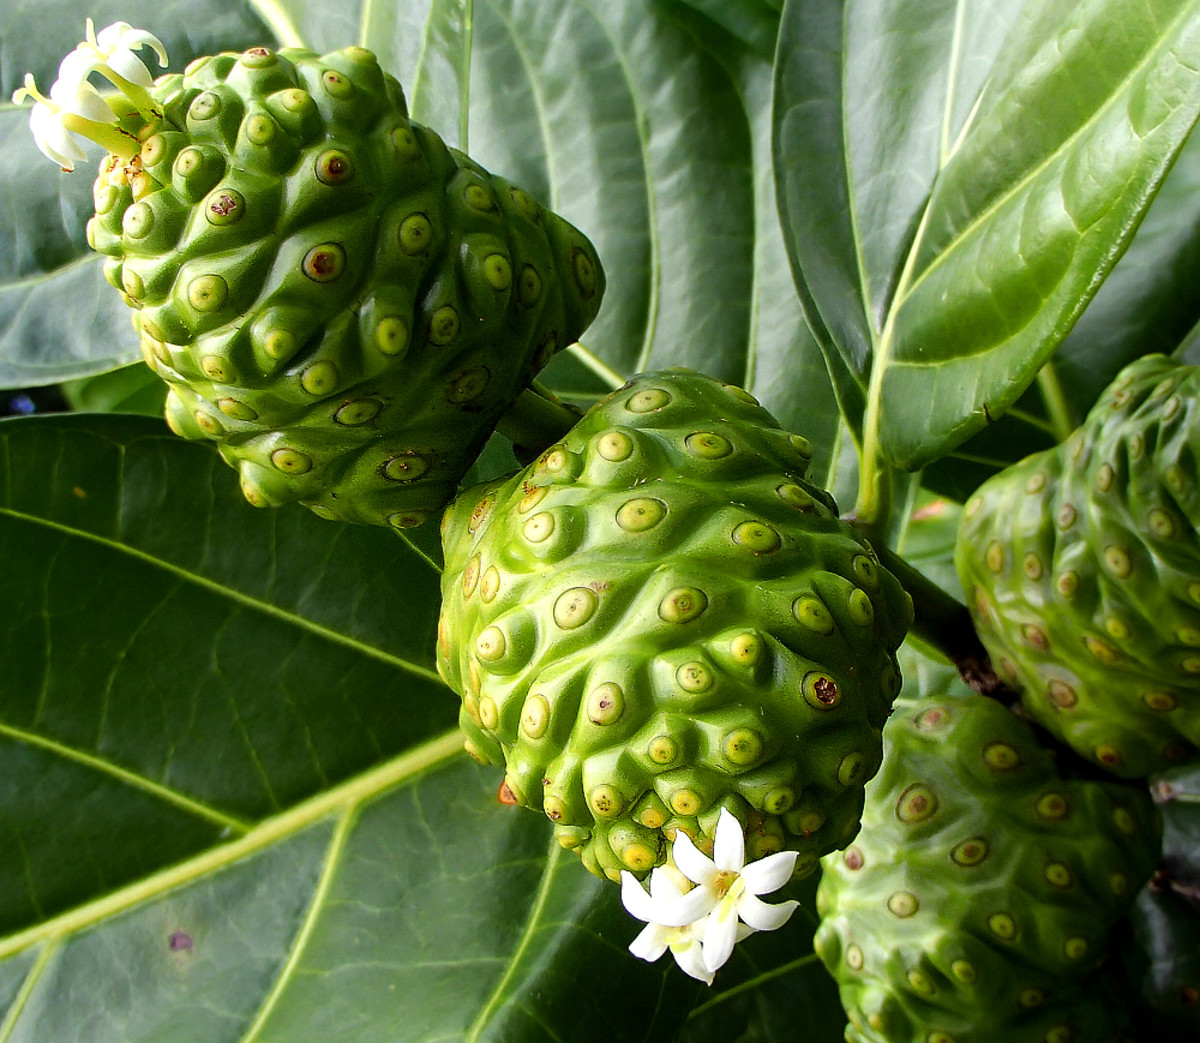 The infamous Noni fruit that smells and tastes (if you dare eating it!) like vomit.